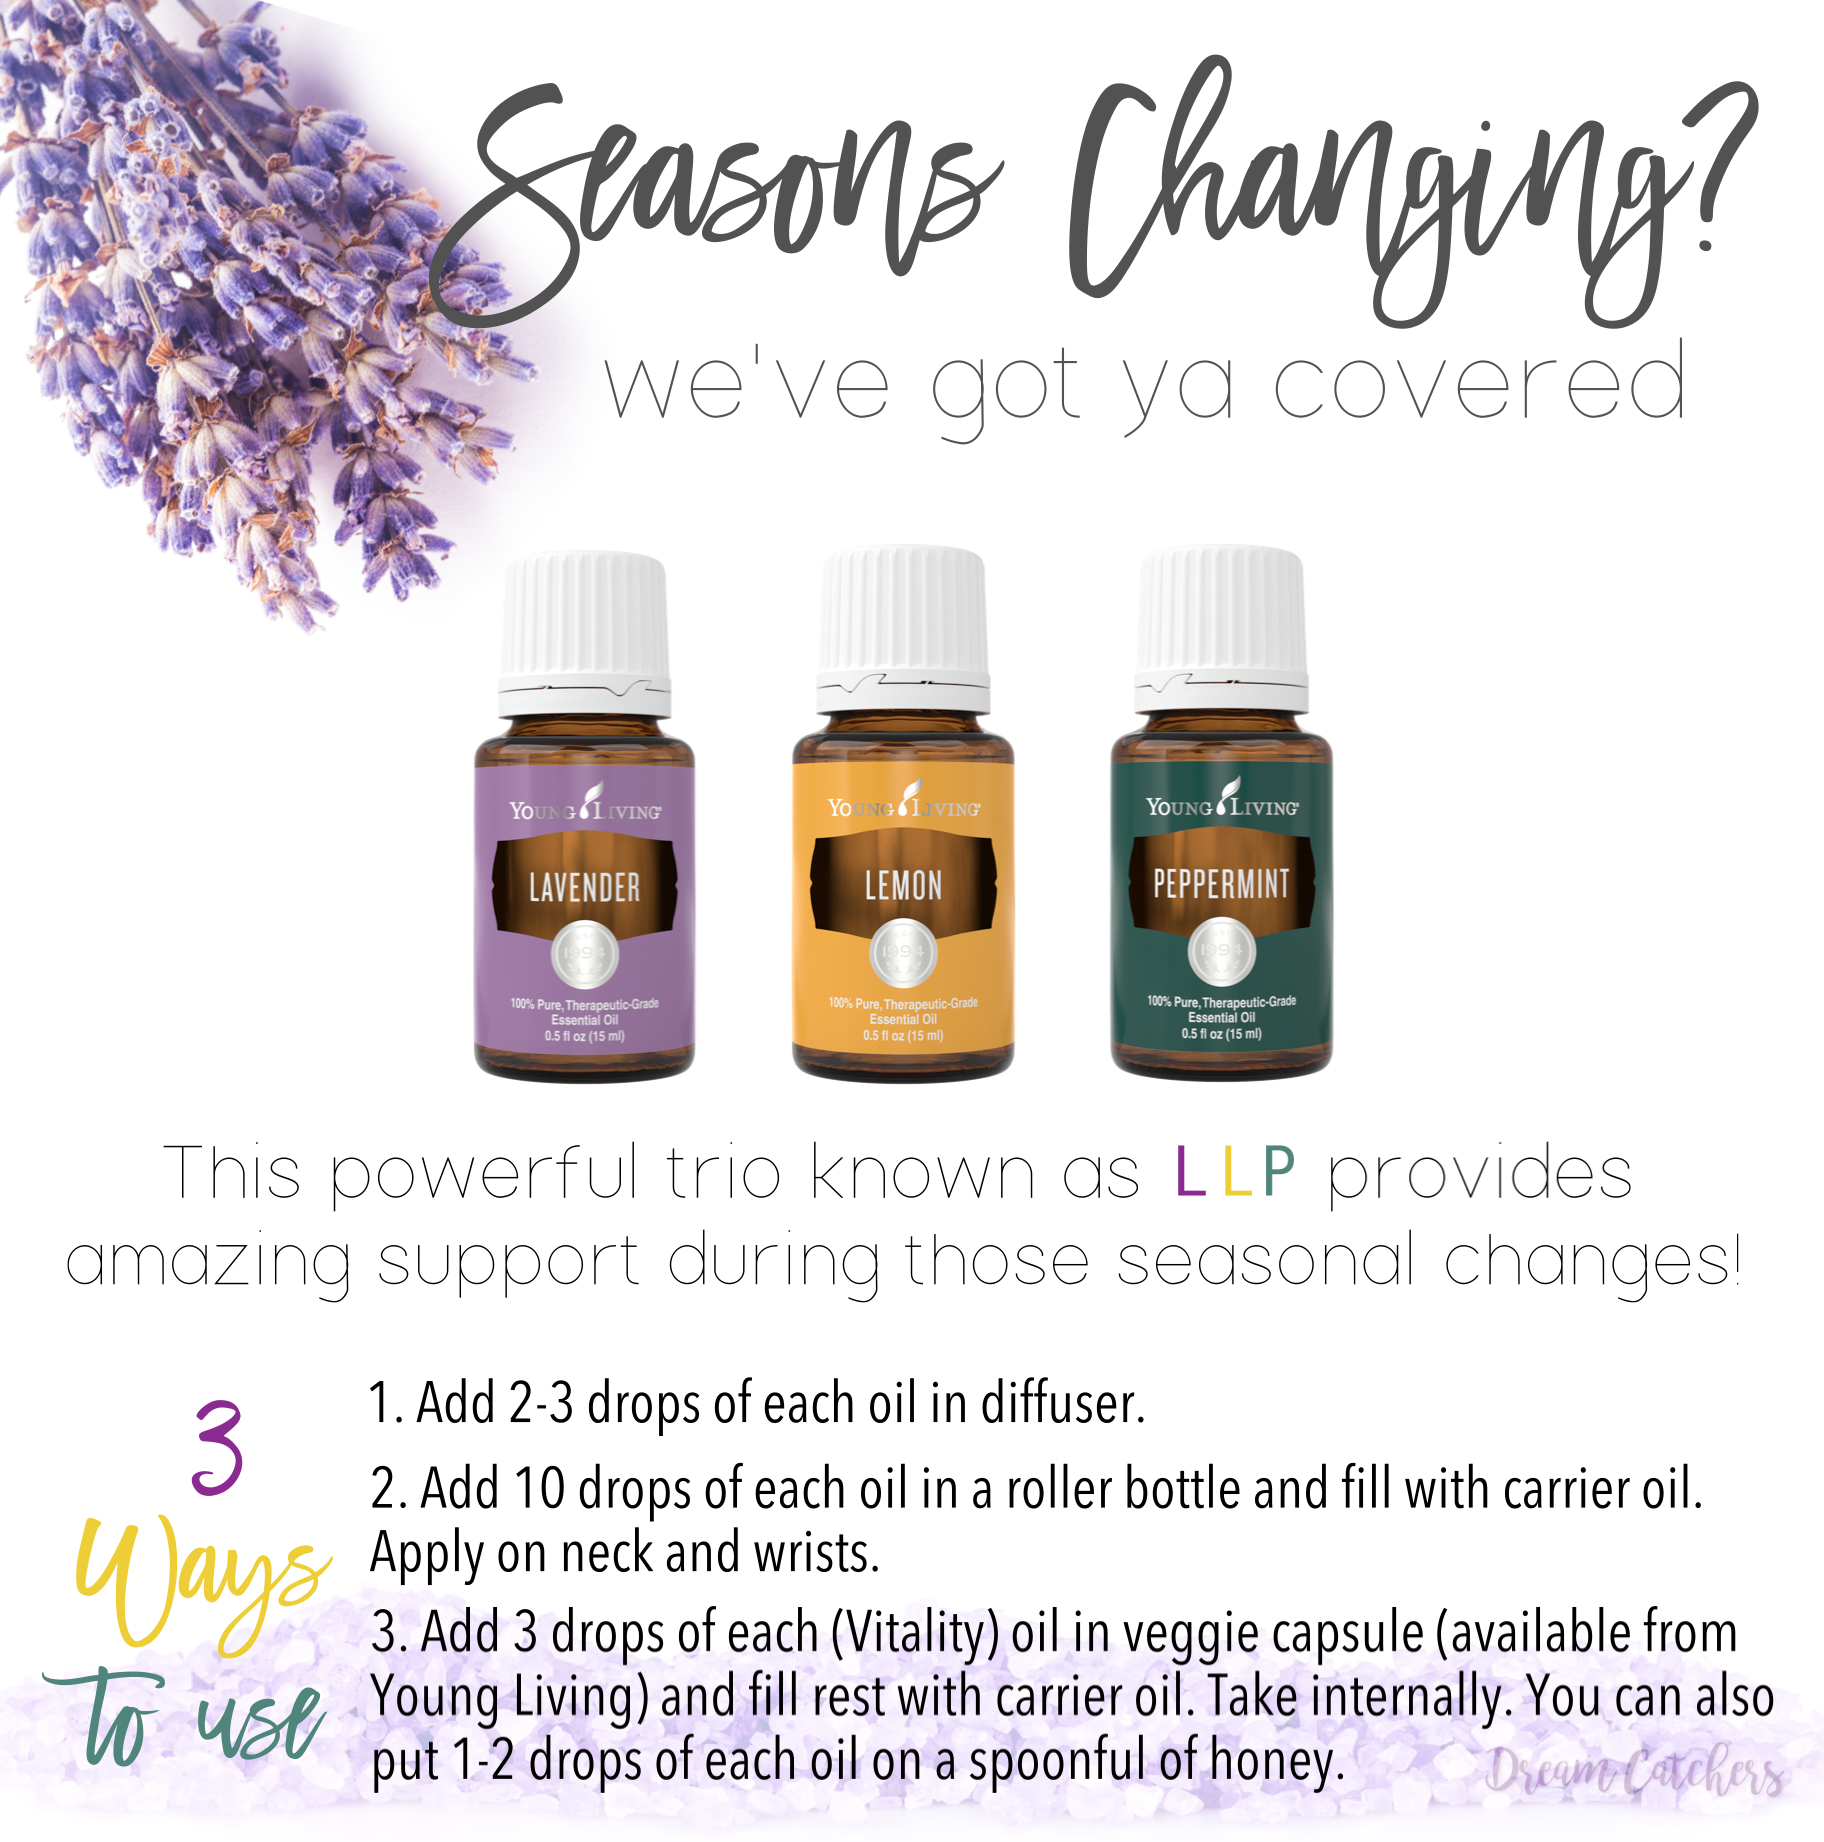 How To Support Those Seasonal Changes Naturally! - Decorchick!